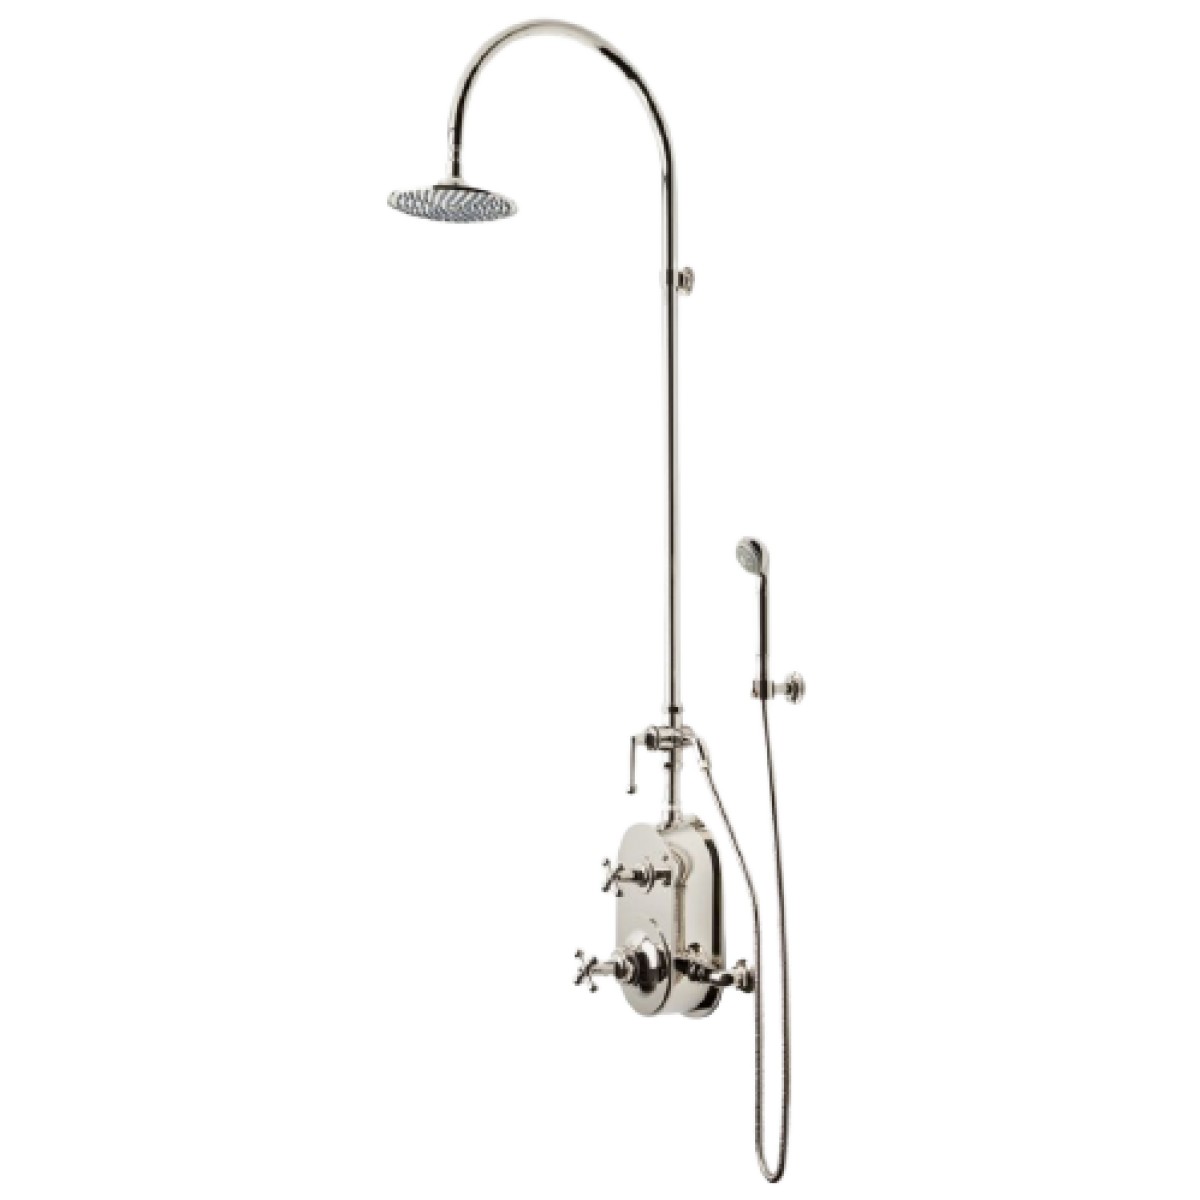 Dash Exposed Thermostatic Shower System with 8" Shower Head, Handshower, Metal Lever Diverter Handle and Metal Cross Handles | Highlight image